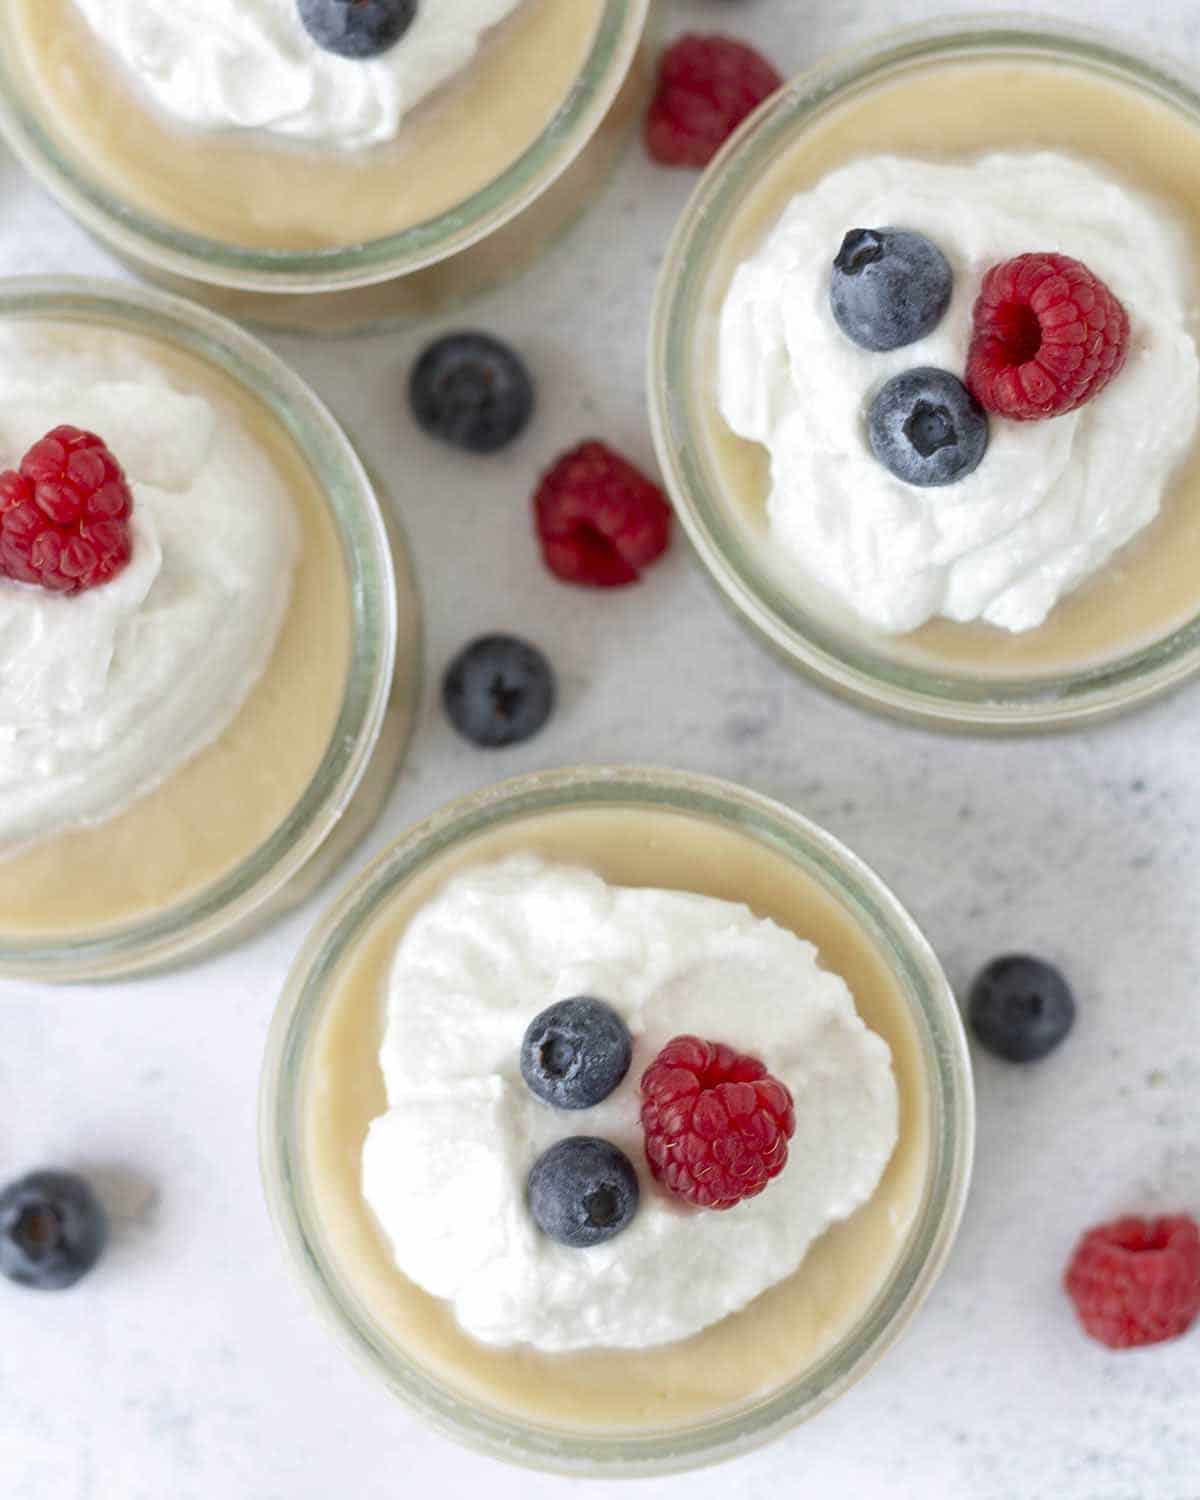 An overhead shot showing four bowls of dairy-free vanilla pudding.